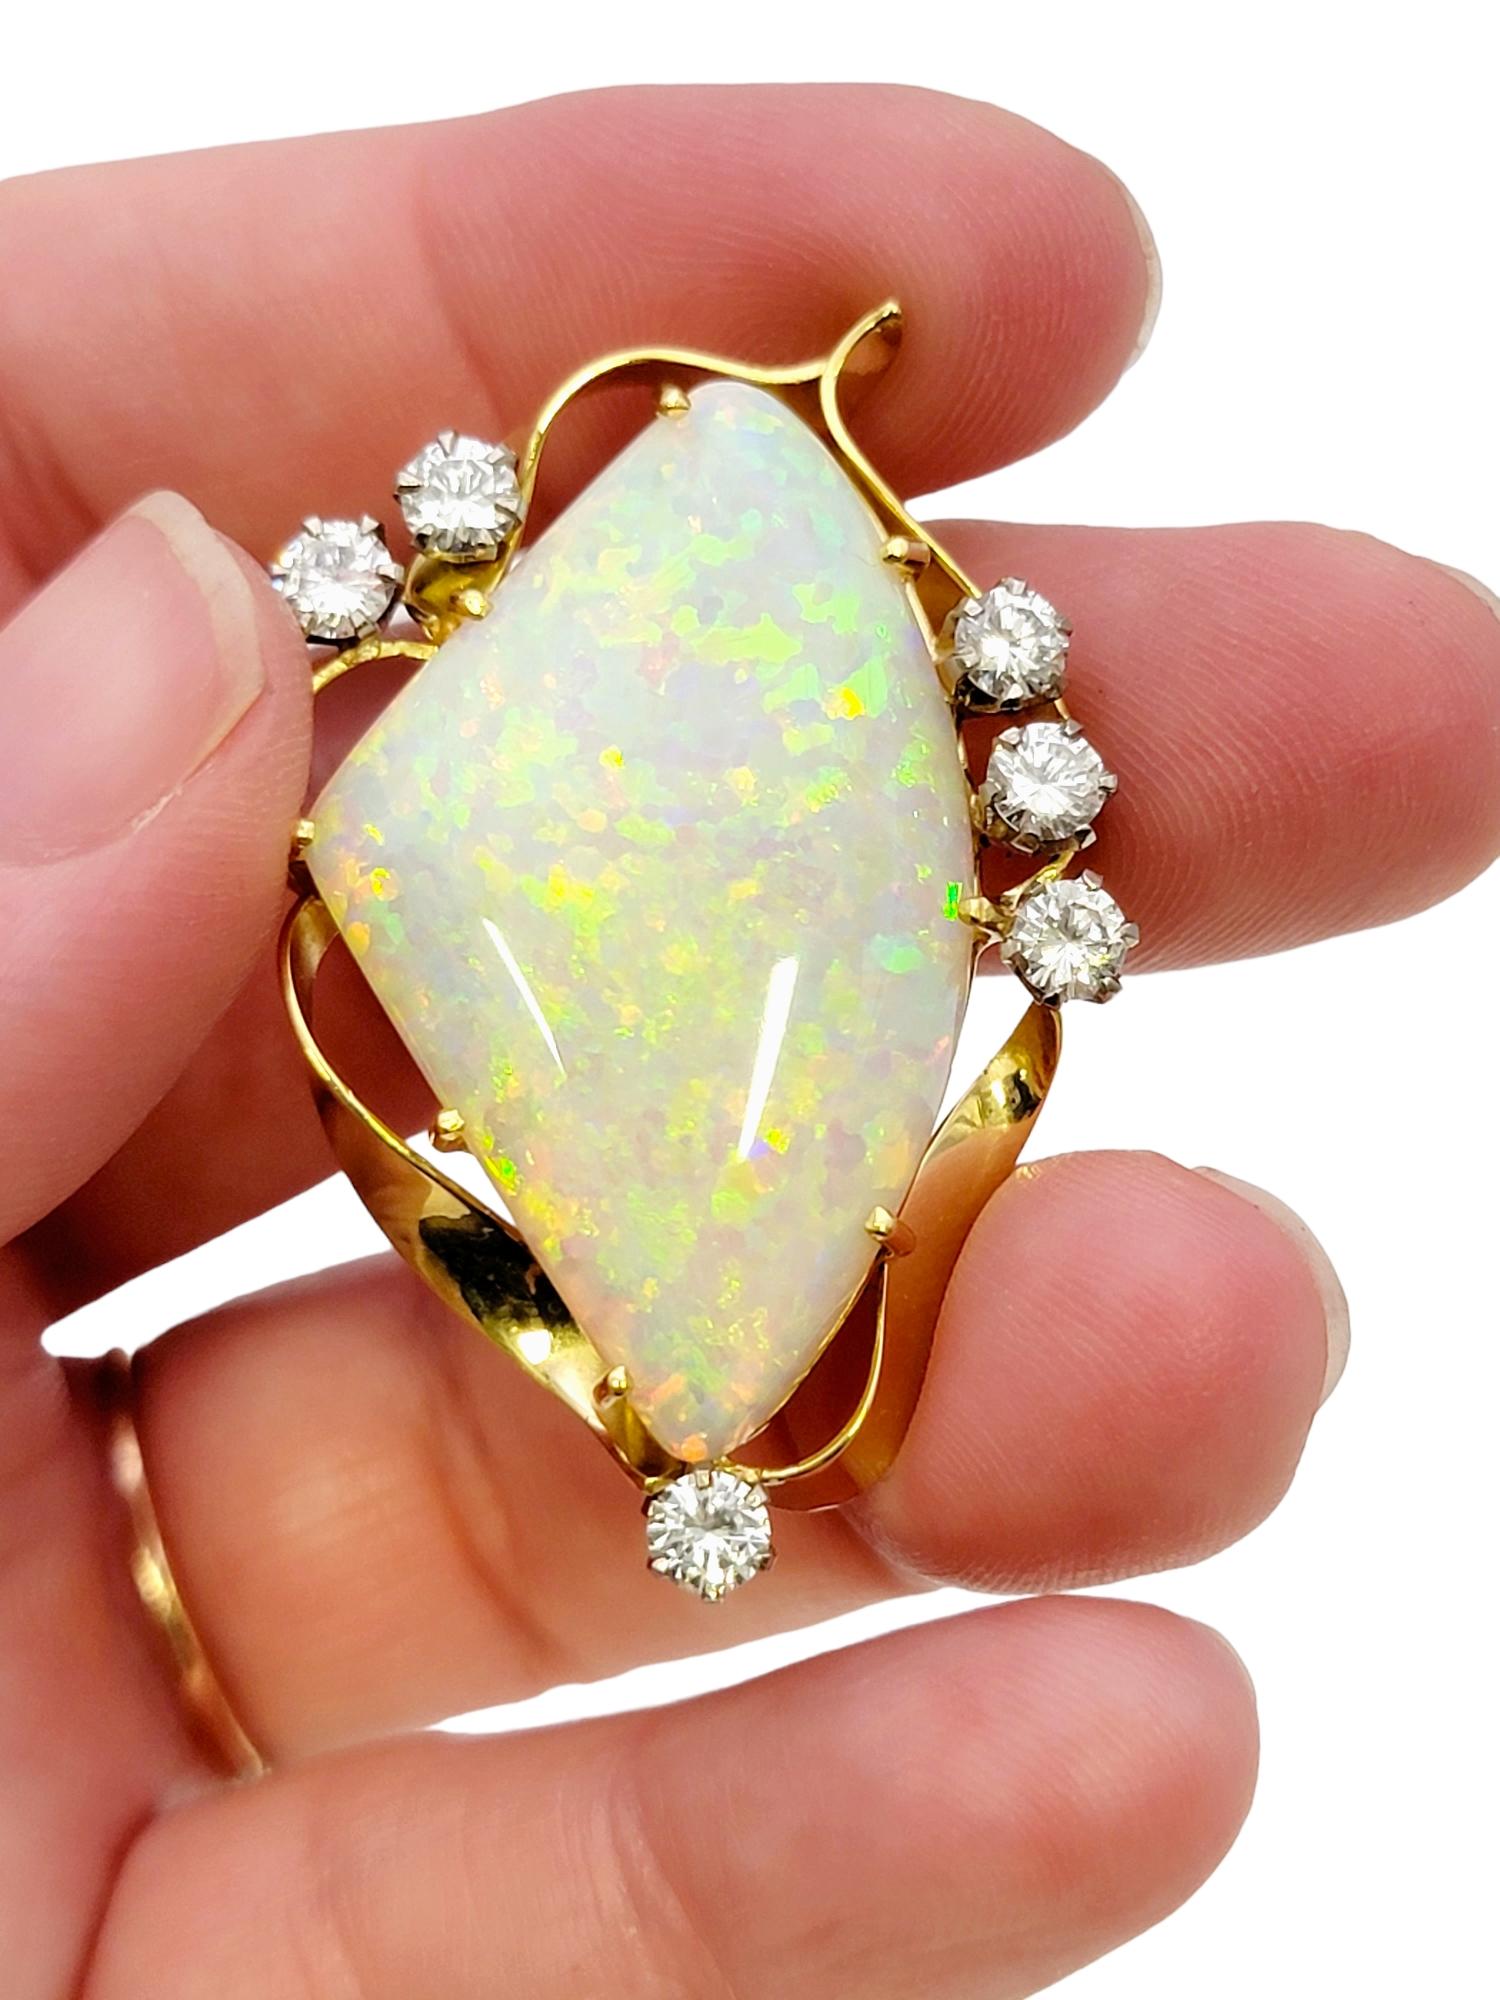 Triangle Cabochon White Opal Brooch / Pendant with Diamonds 18 Karat Yellow Gold For Sale 8